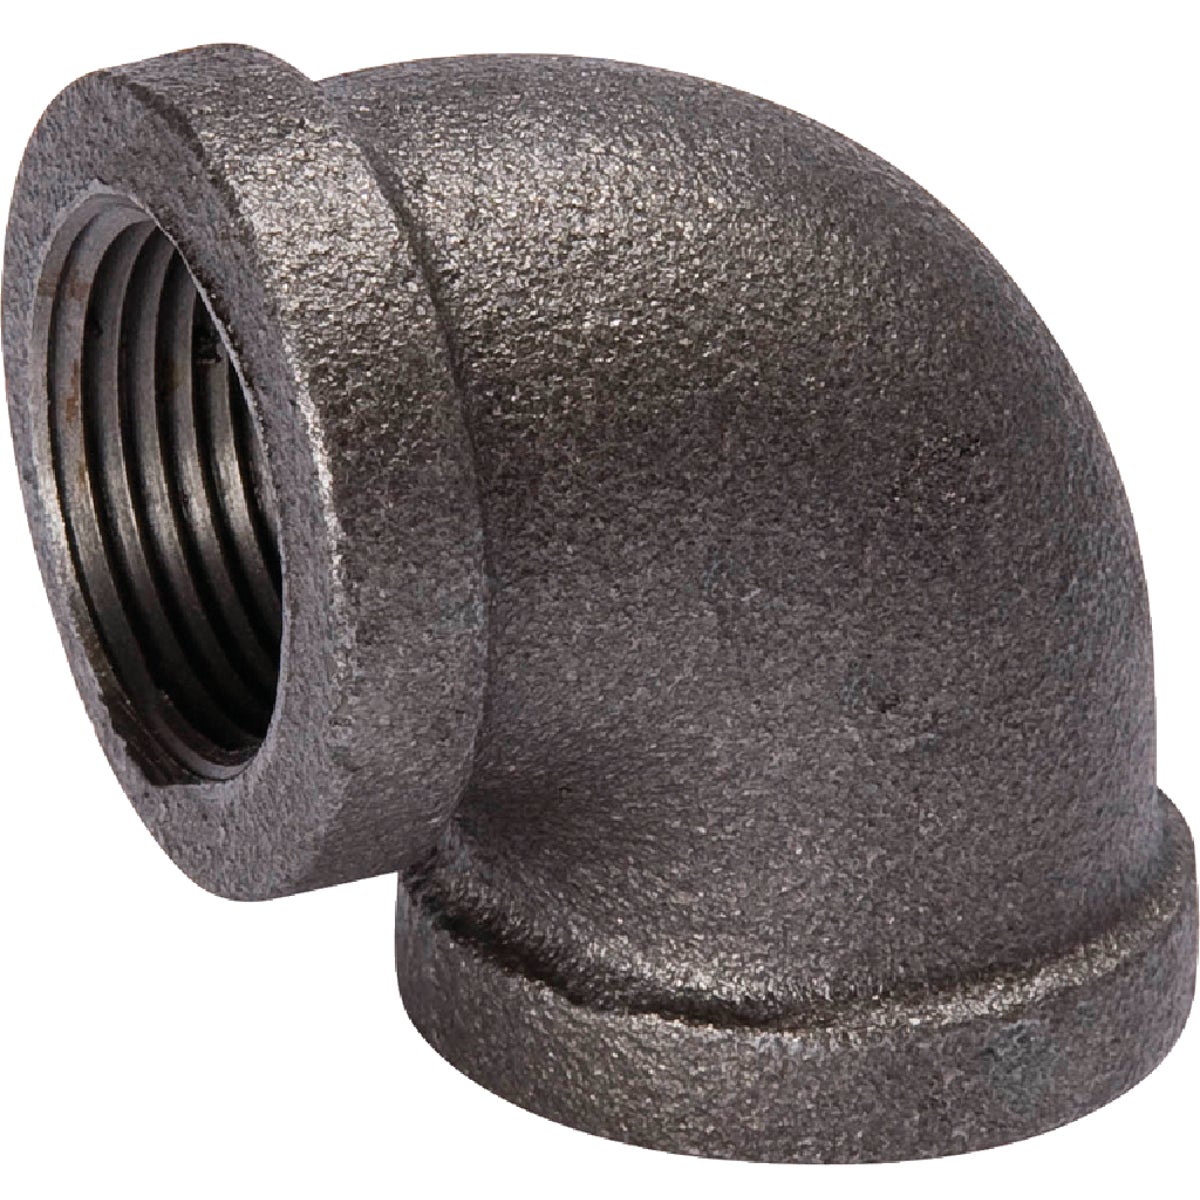 Southland 1 In. 90 Deg. Malleable Black Iron Elbow (1/4 Bend)